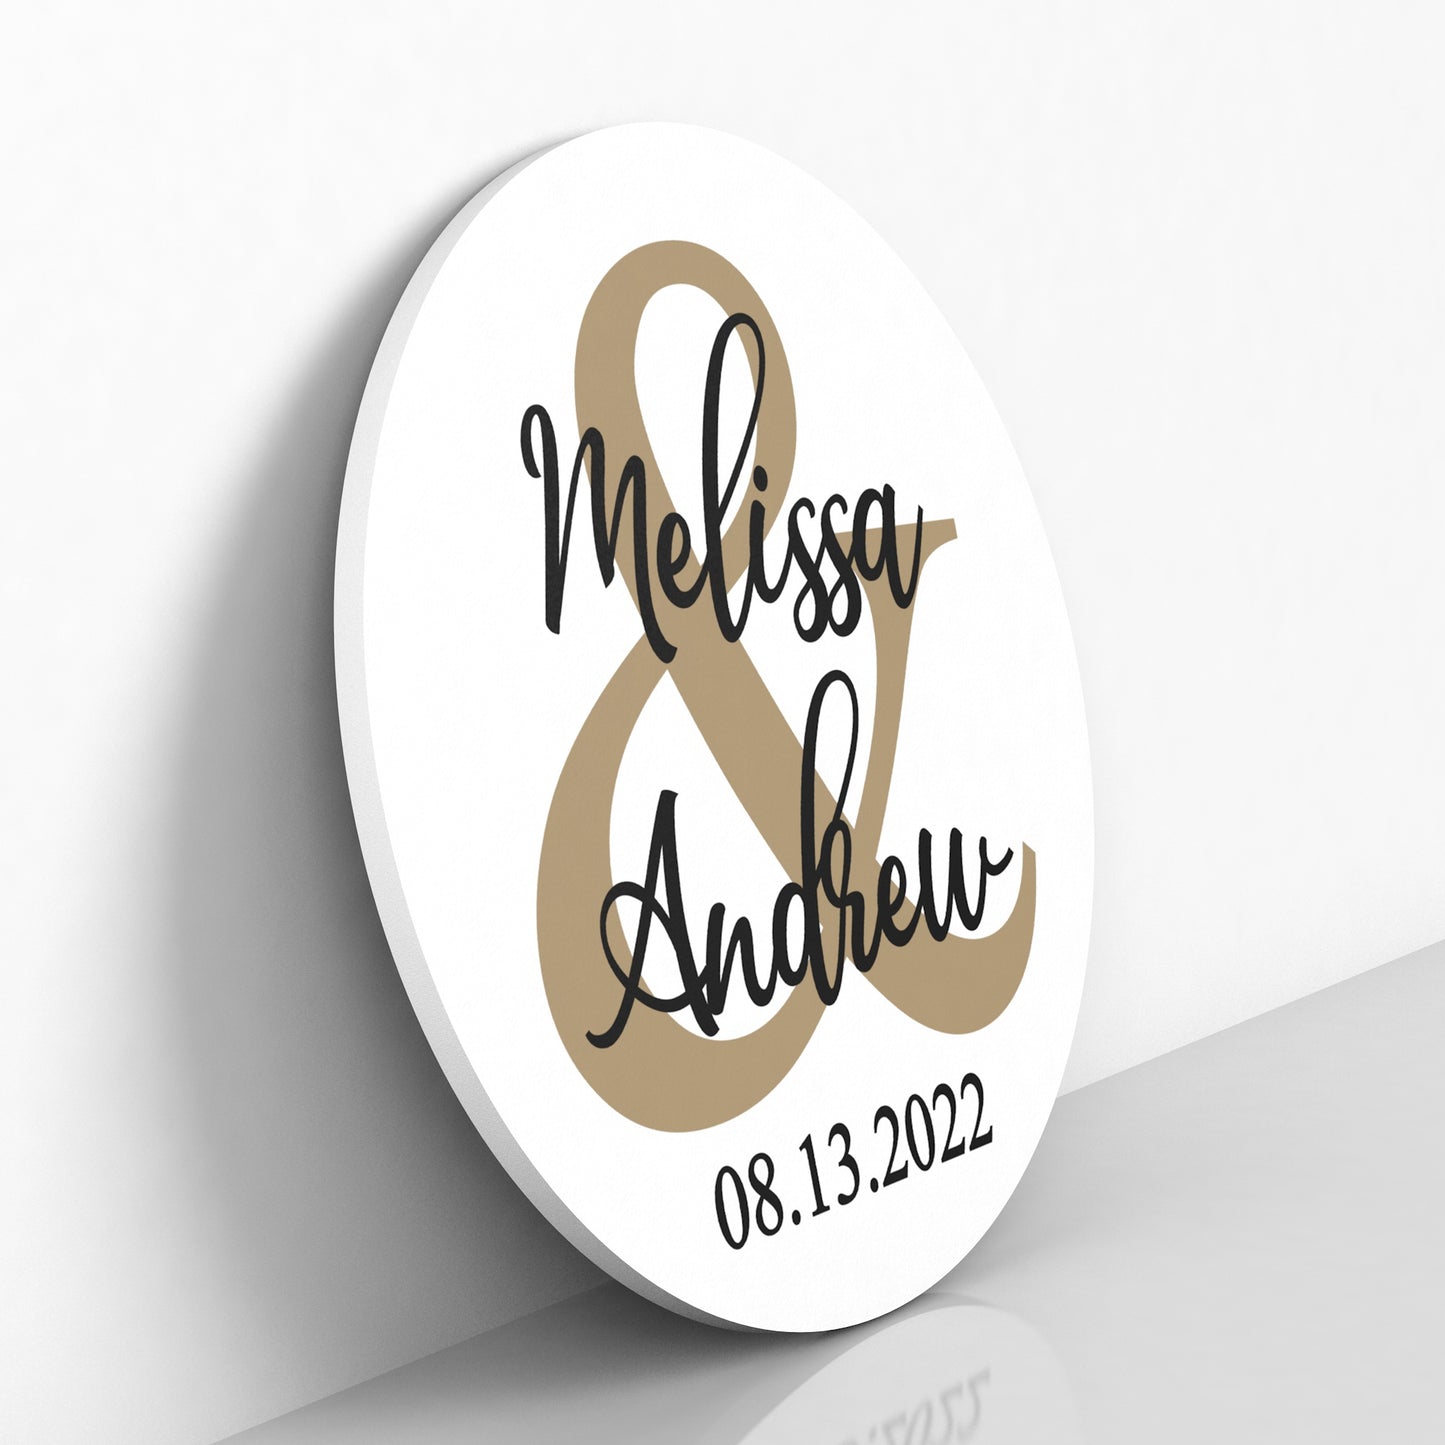 Personalized Name Sign. Dating, Engagement, Wedding, Anniversary Gift